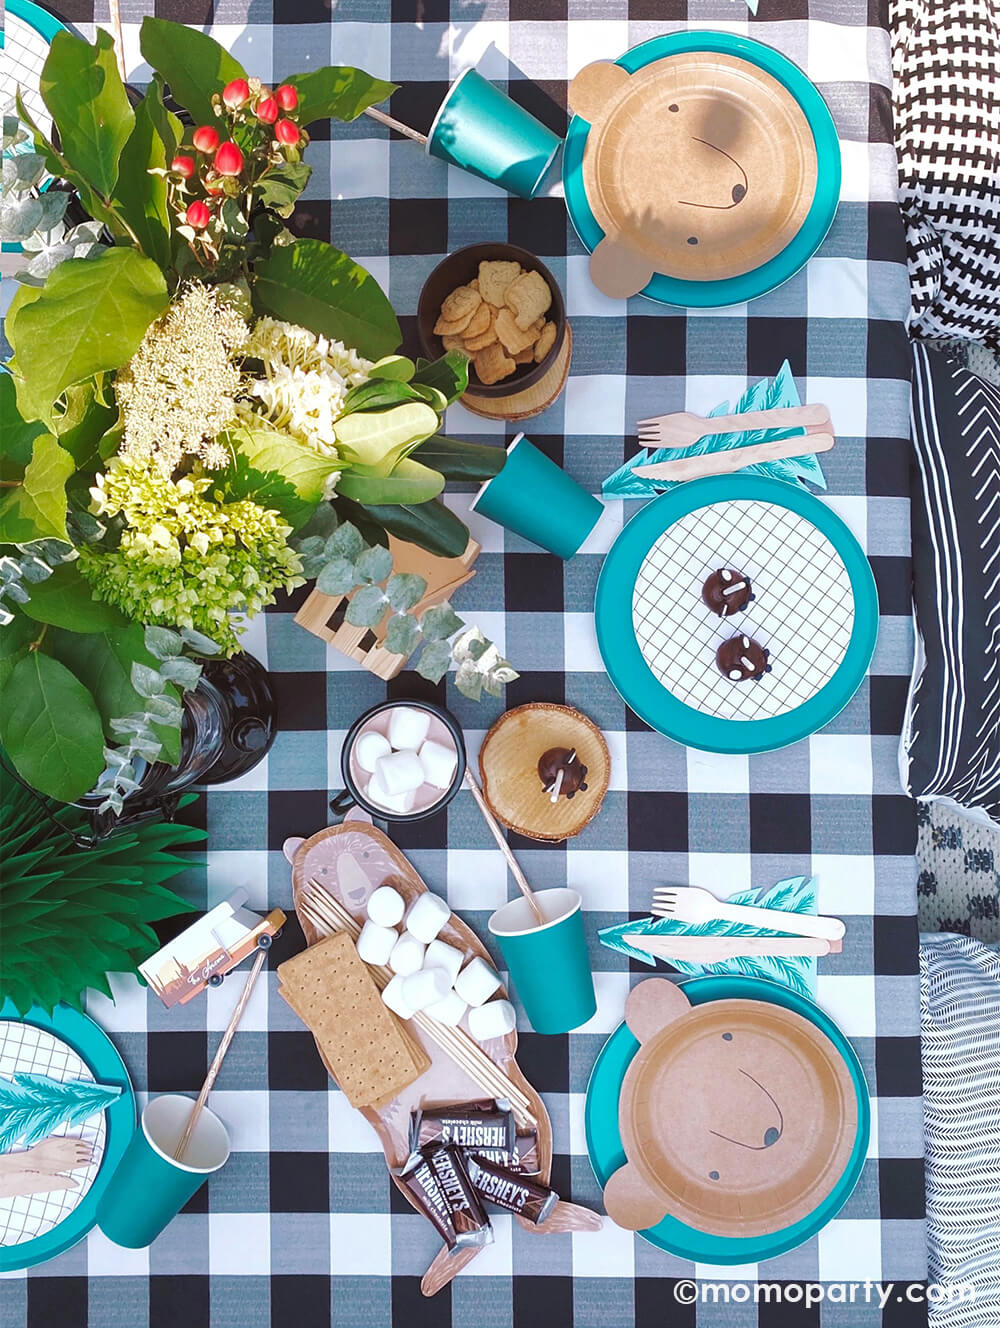 Kid's Woodland Camping outdoor birthday party, kid table decorated with Bear small plates and black and white small plates layered with Oh happy day forest green 9 inch Plates, Meri Meri tree napkins with wooden utensils, black campfire mugs, brown bear platter with Hershey's milk chocolate bar, marshmallows and graham cracker ready for smore, fresh flowers, green Tree tissue decor, all over the black and white Checkered Gingham tablecloth for a modern camping themed birthday party